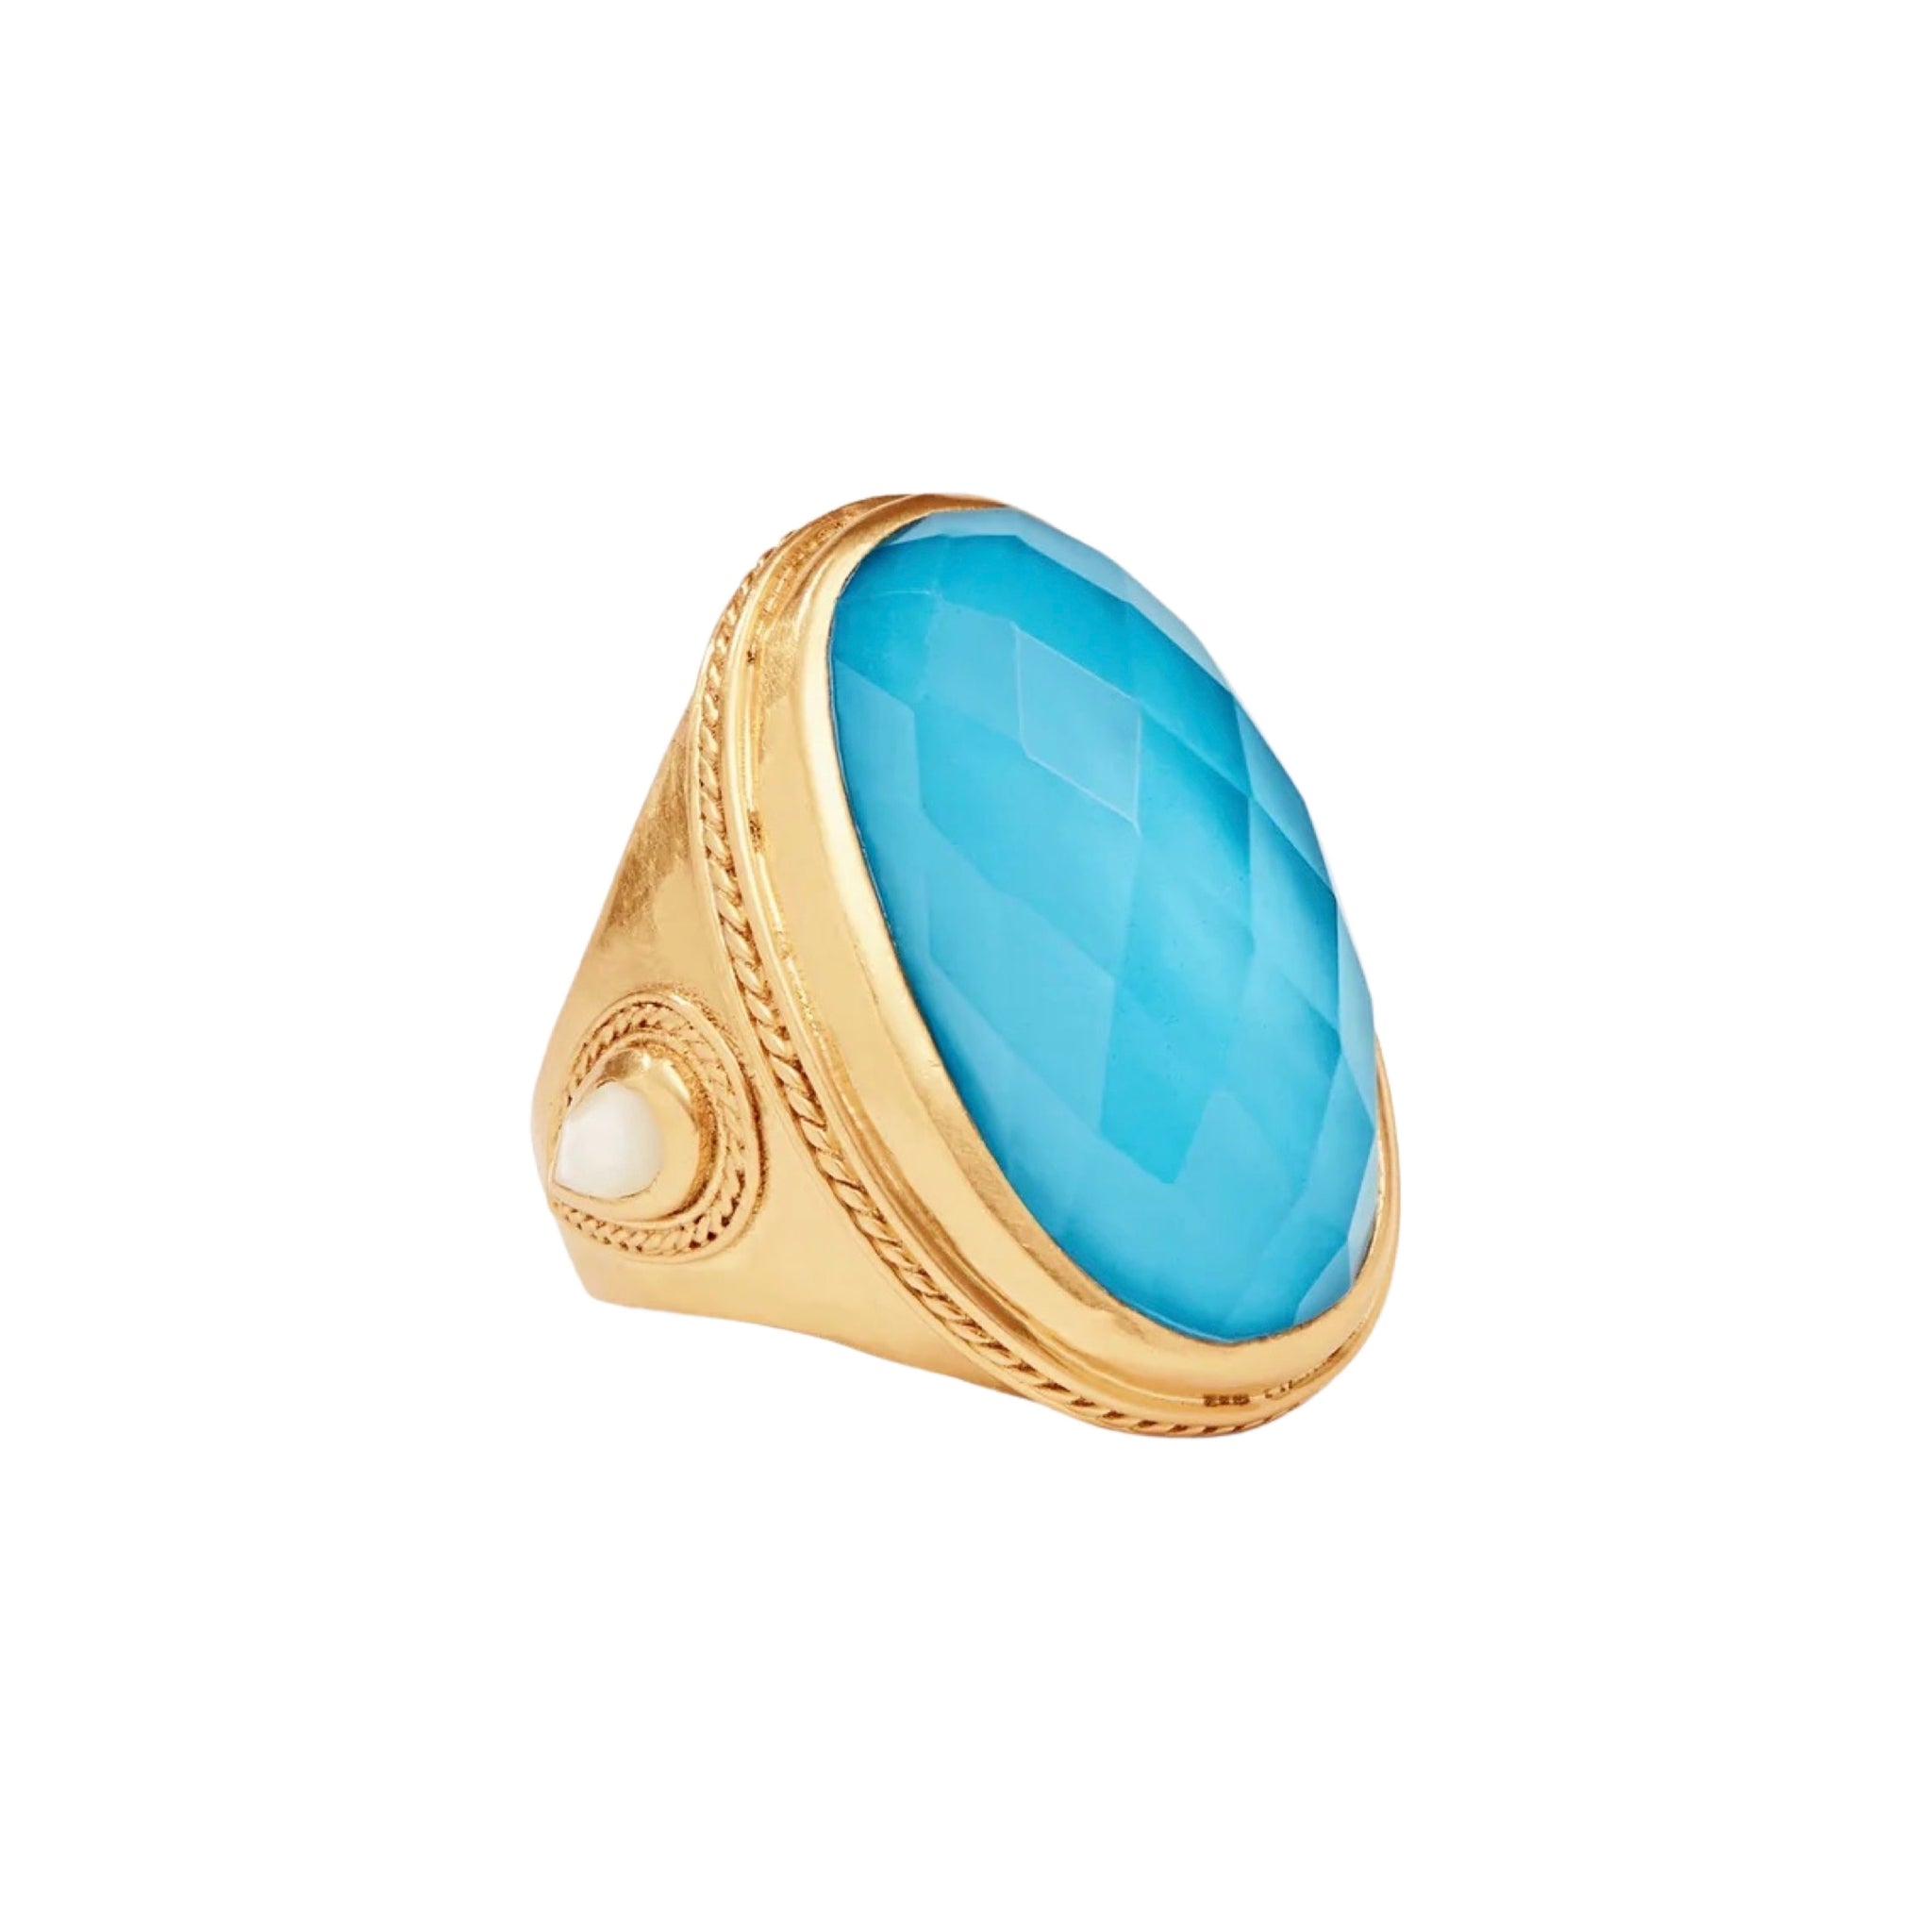 Julie Vos Cassis Statement Ring  is Available at Shaylula Jewlery & Gifts in Tarrytown, NY and online. This Julie Vos Cassis Statement Ring features a radiant doublet gemstone with pear shape mother of pearl accents and twisted wire detail.  • 24K gold plate, iridescent pacific blue mother of pearl doublet, pearl • Size 8